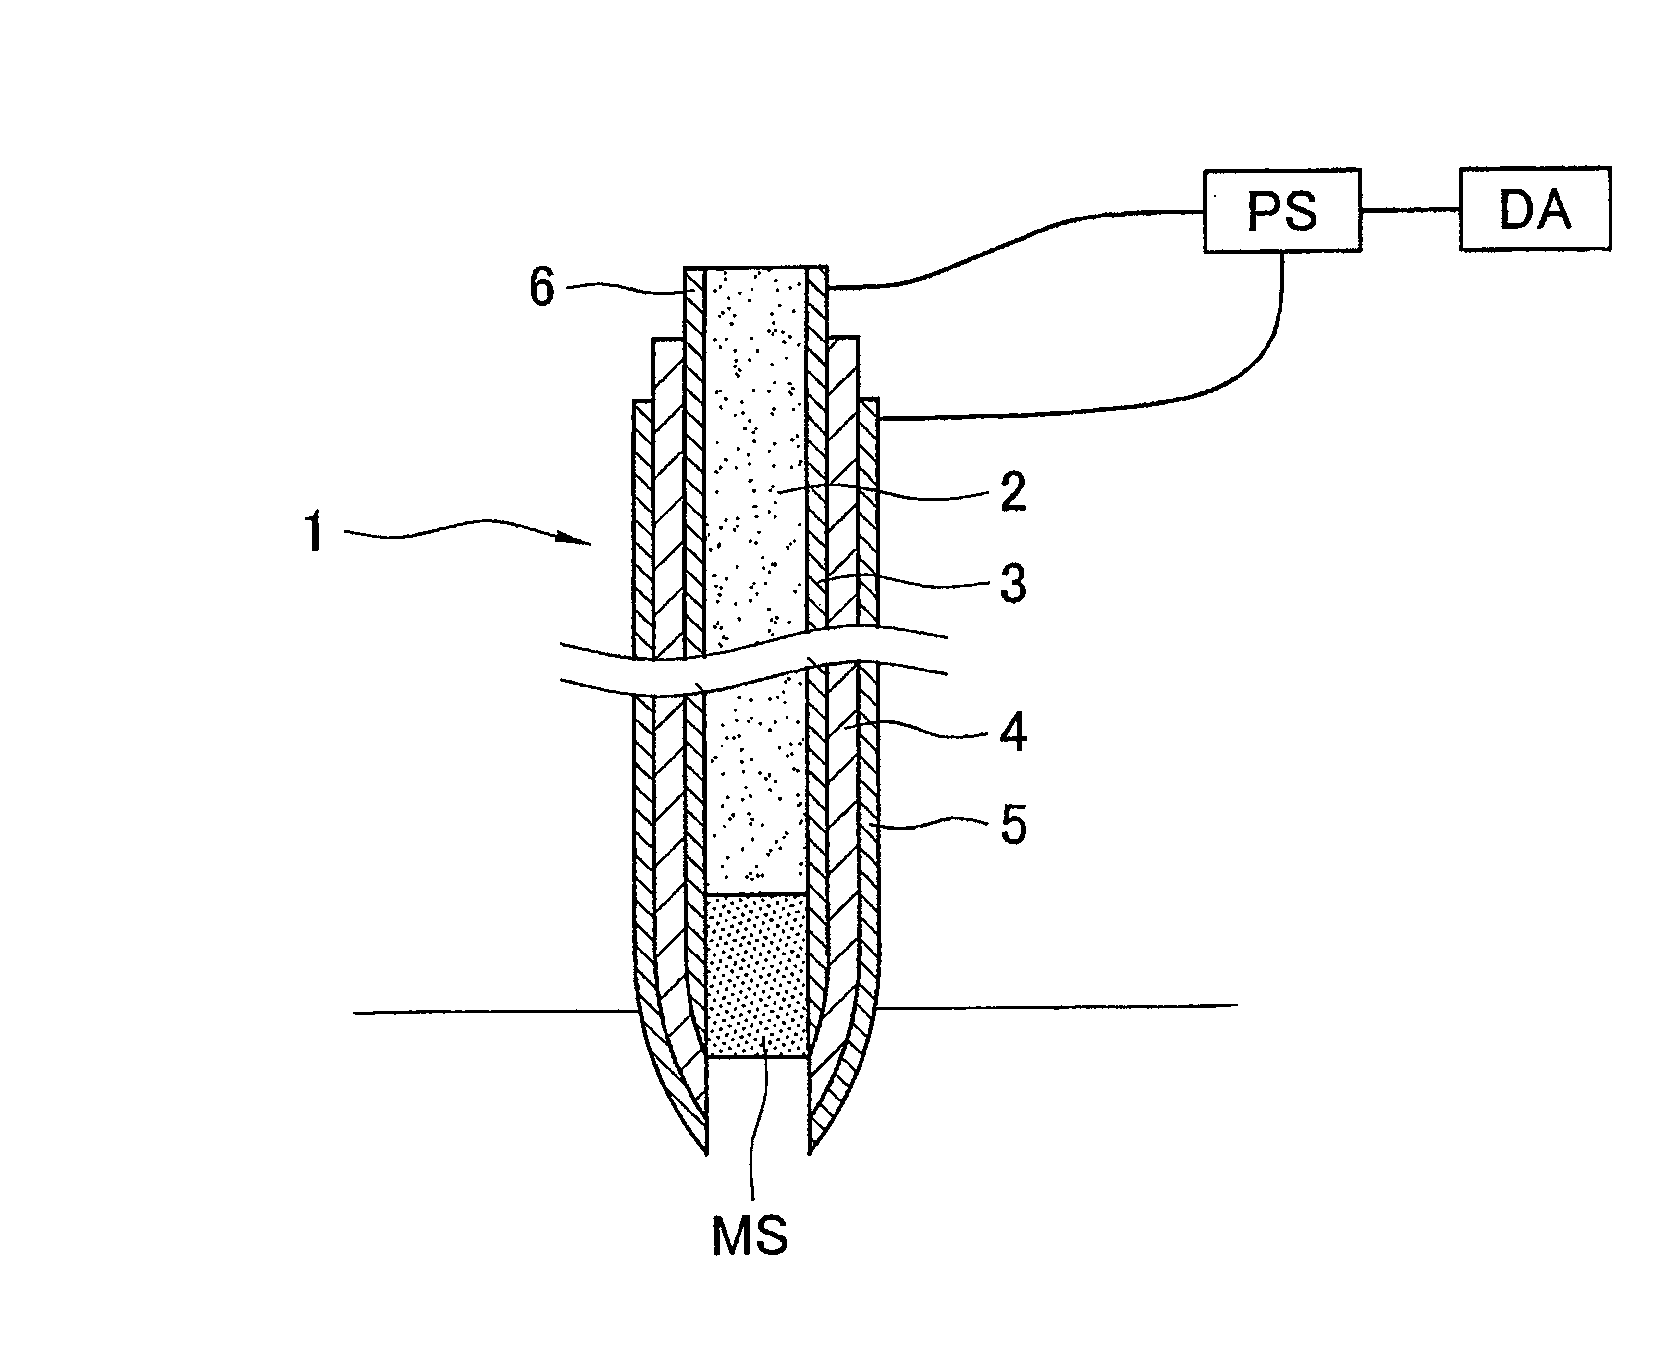 Biodevice and contact part structure of biodevice